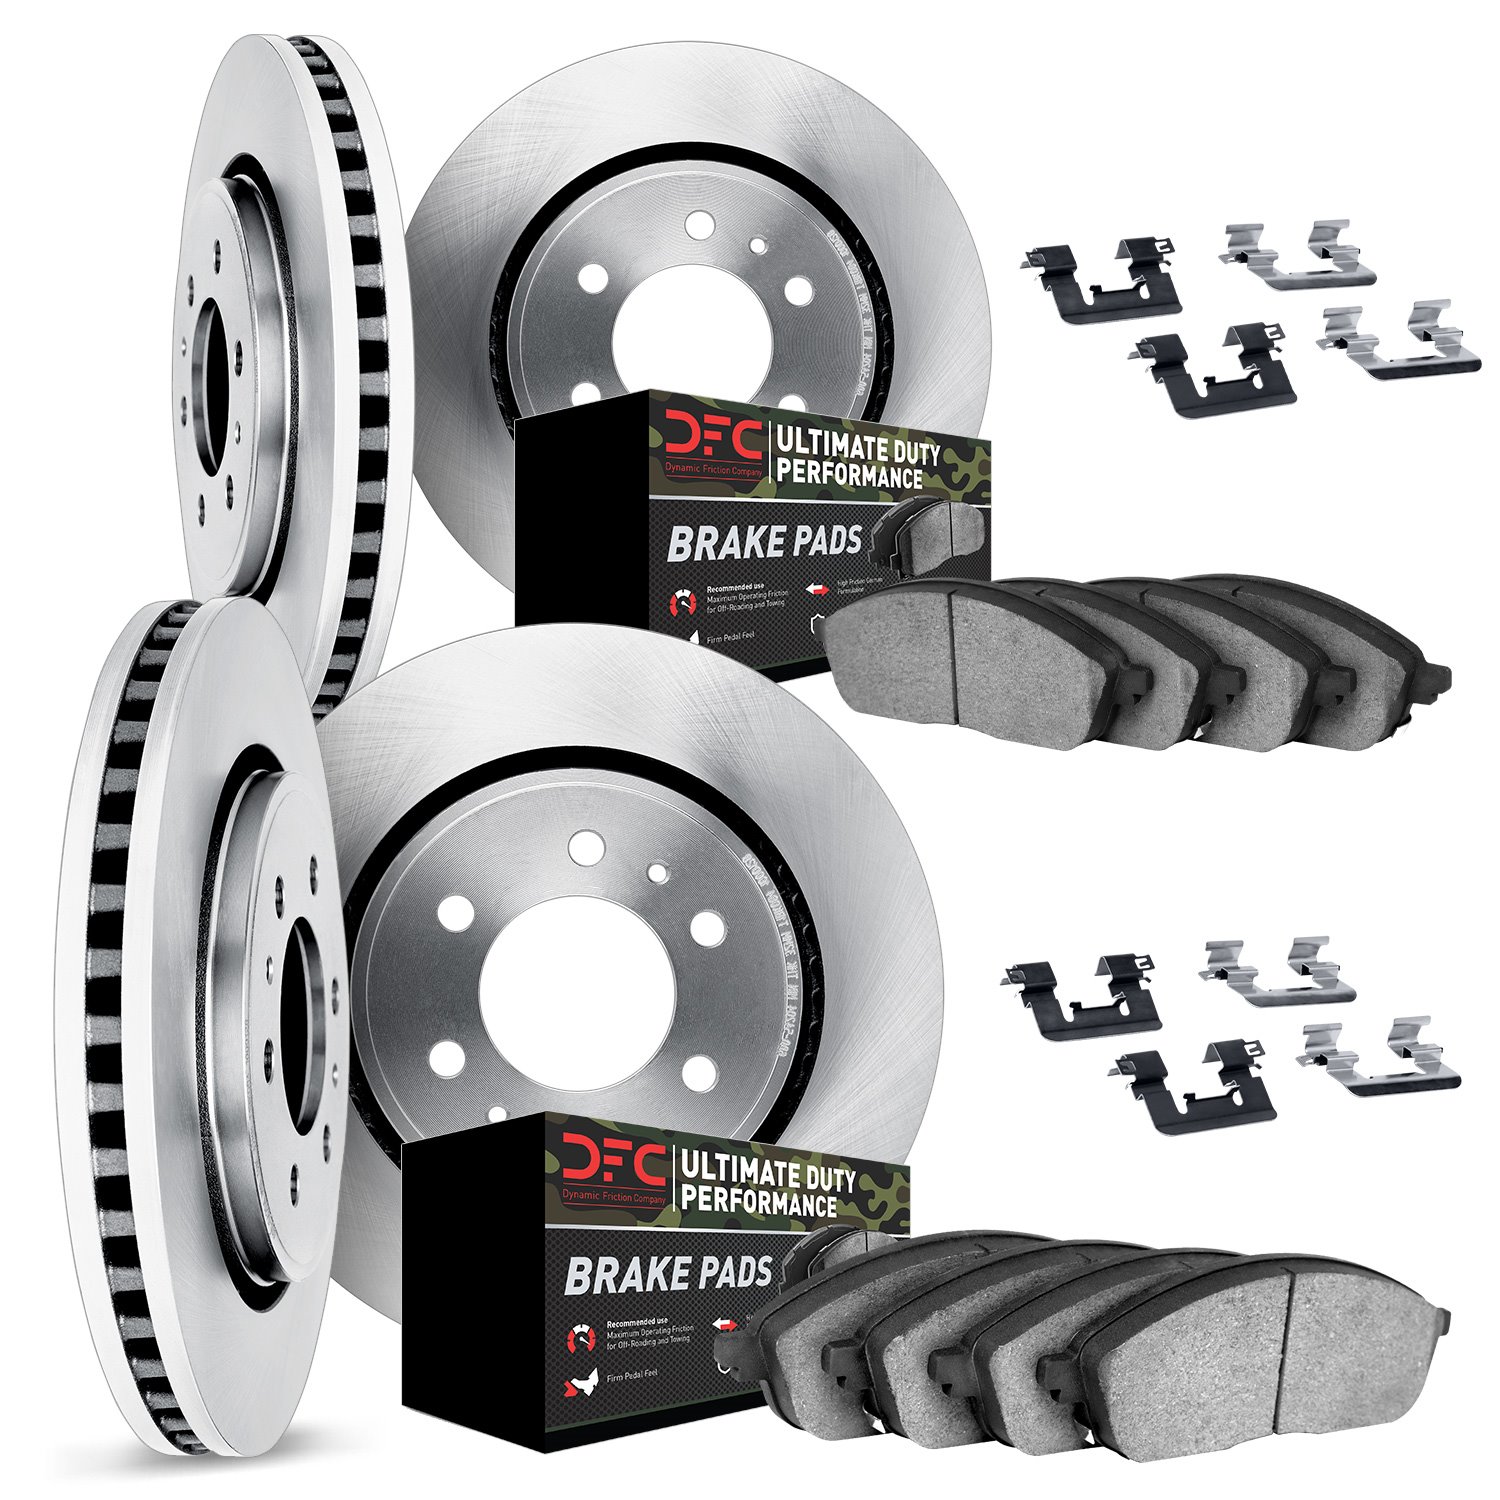 6414-67021 Brake Rotors with Ultimate-Duty Brake Pads Kit & Hardware, Fits Select Infiniti/Nissan, Position: Front and Rear